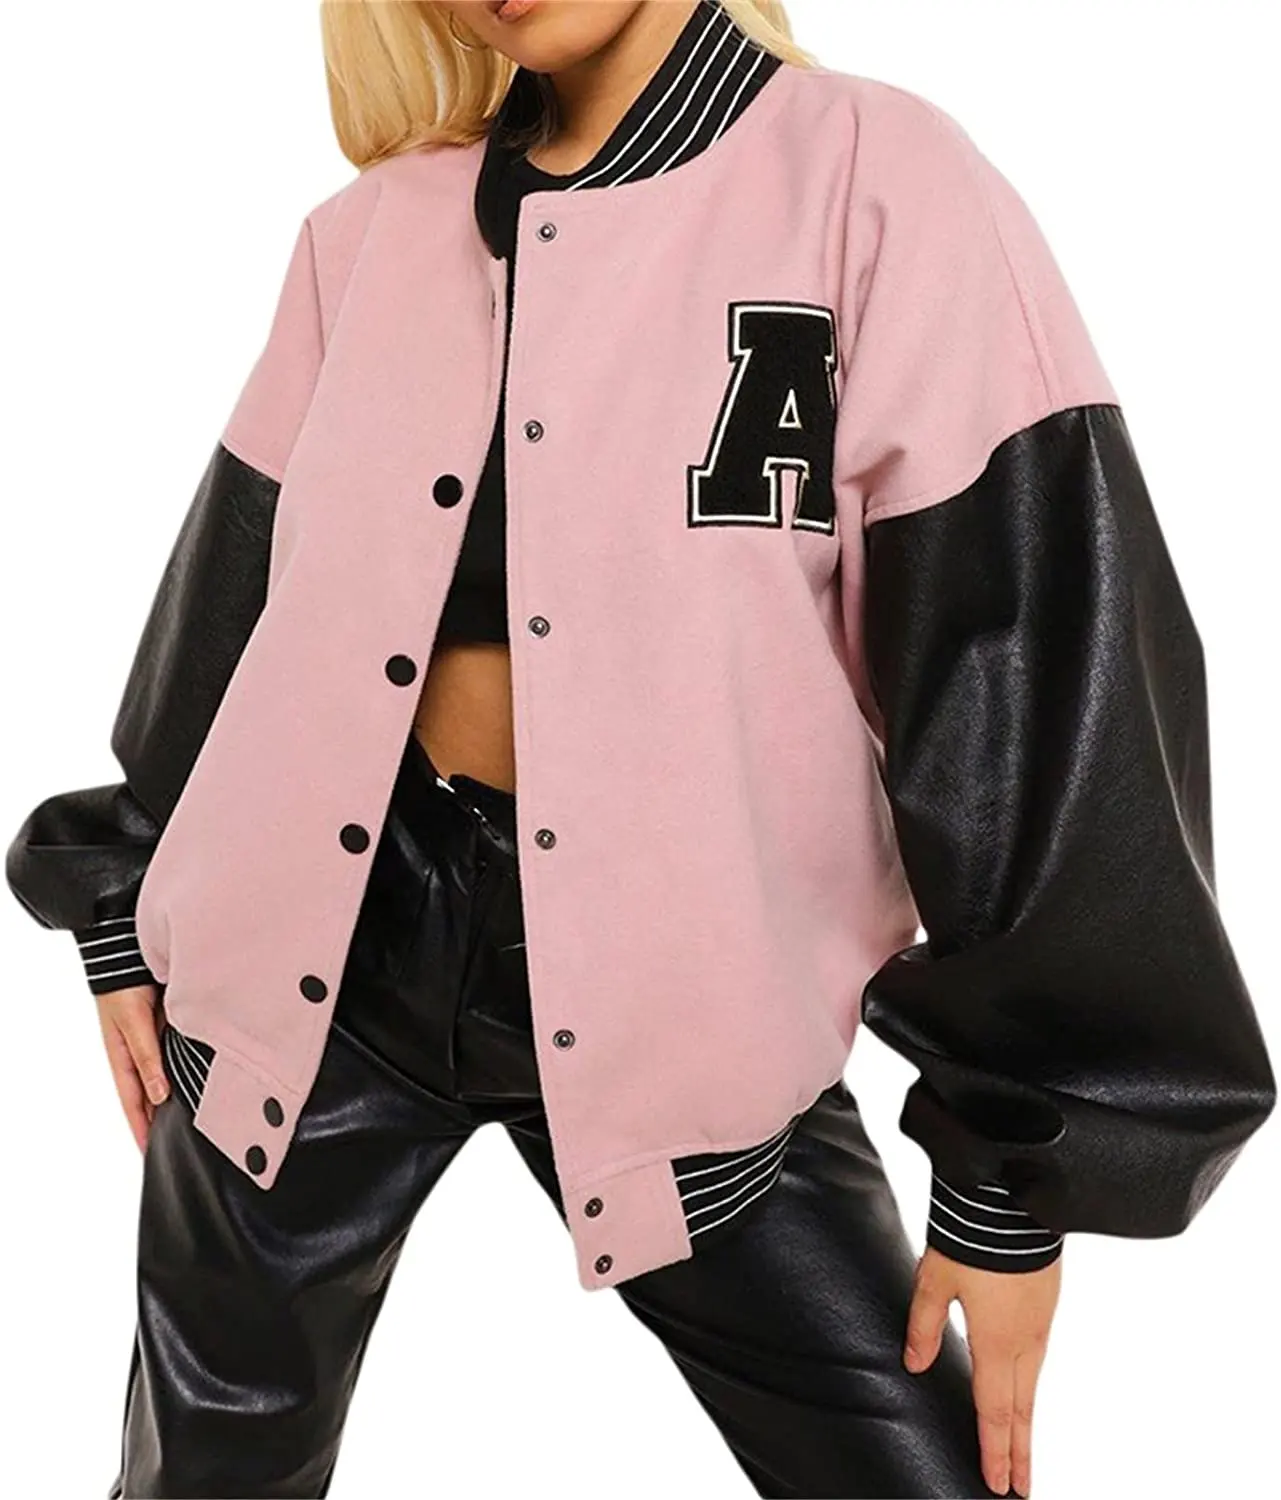 Pink And White Baseball Uniform Female Spring Autumn New Jackets For Women Loose Outerwear Women's Varsity Jacket Distressed